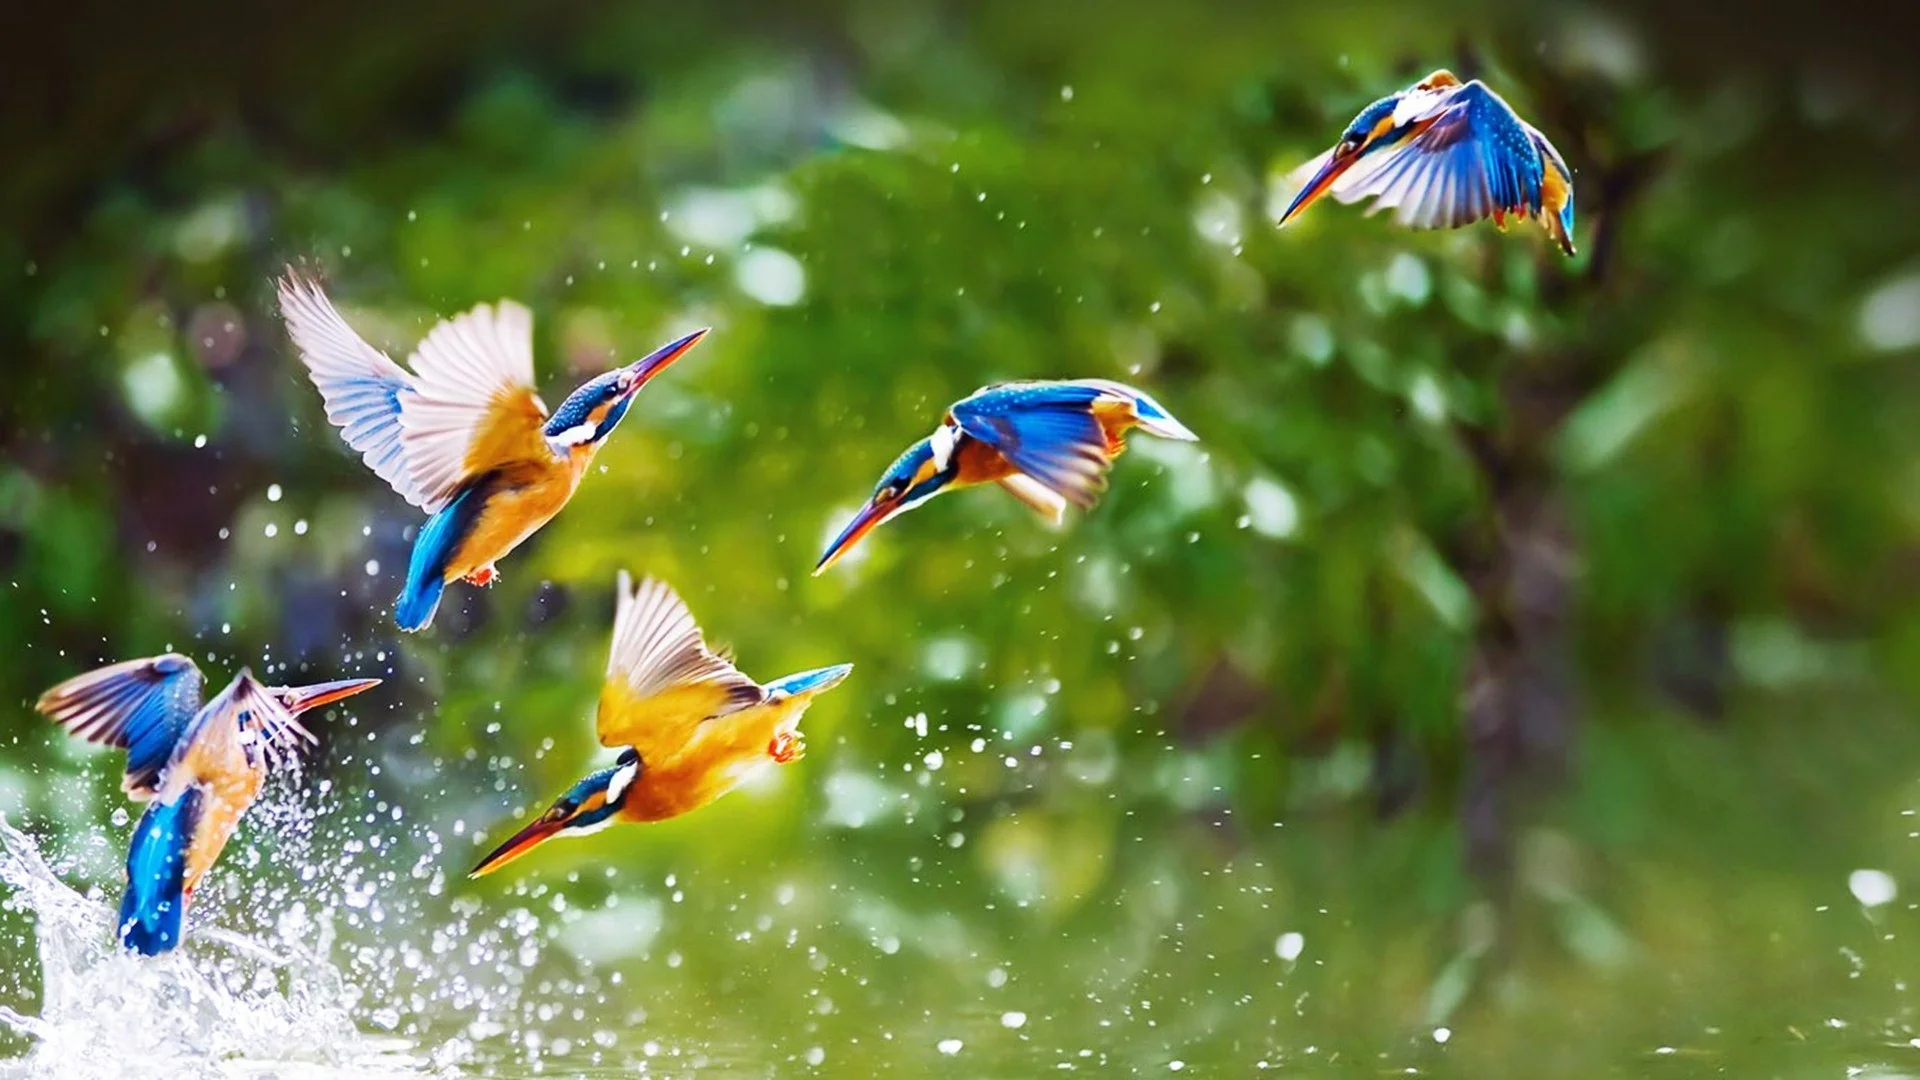 Awesome Birds in Rain Wallpapers HD Pictures